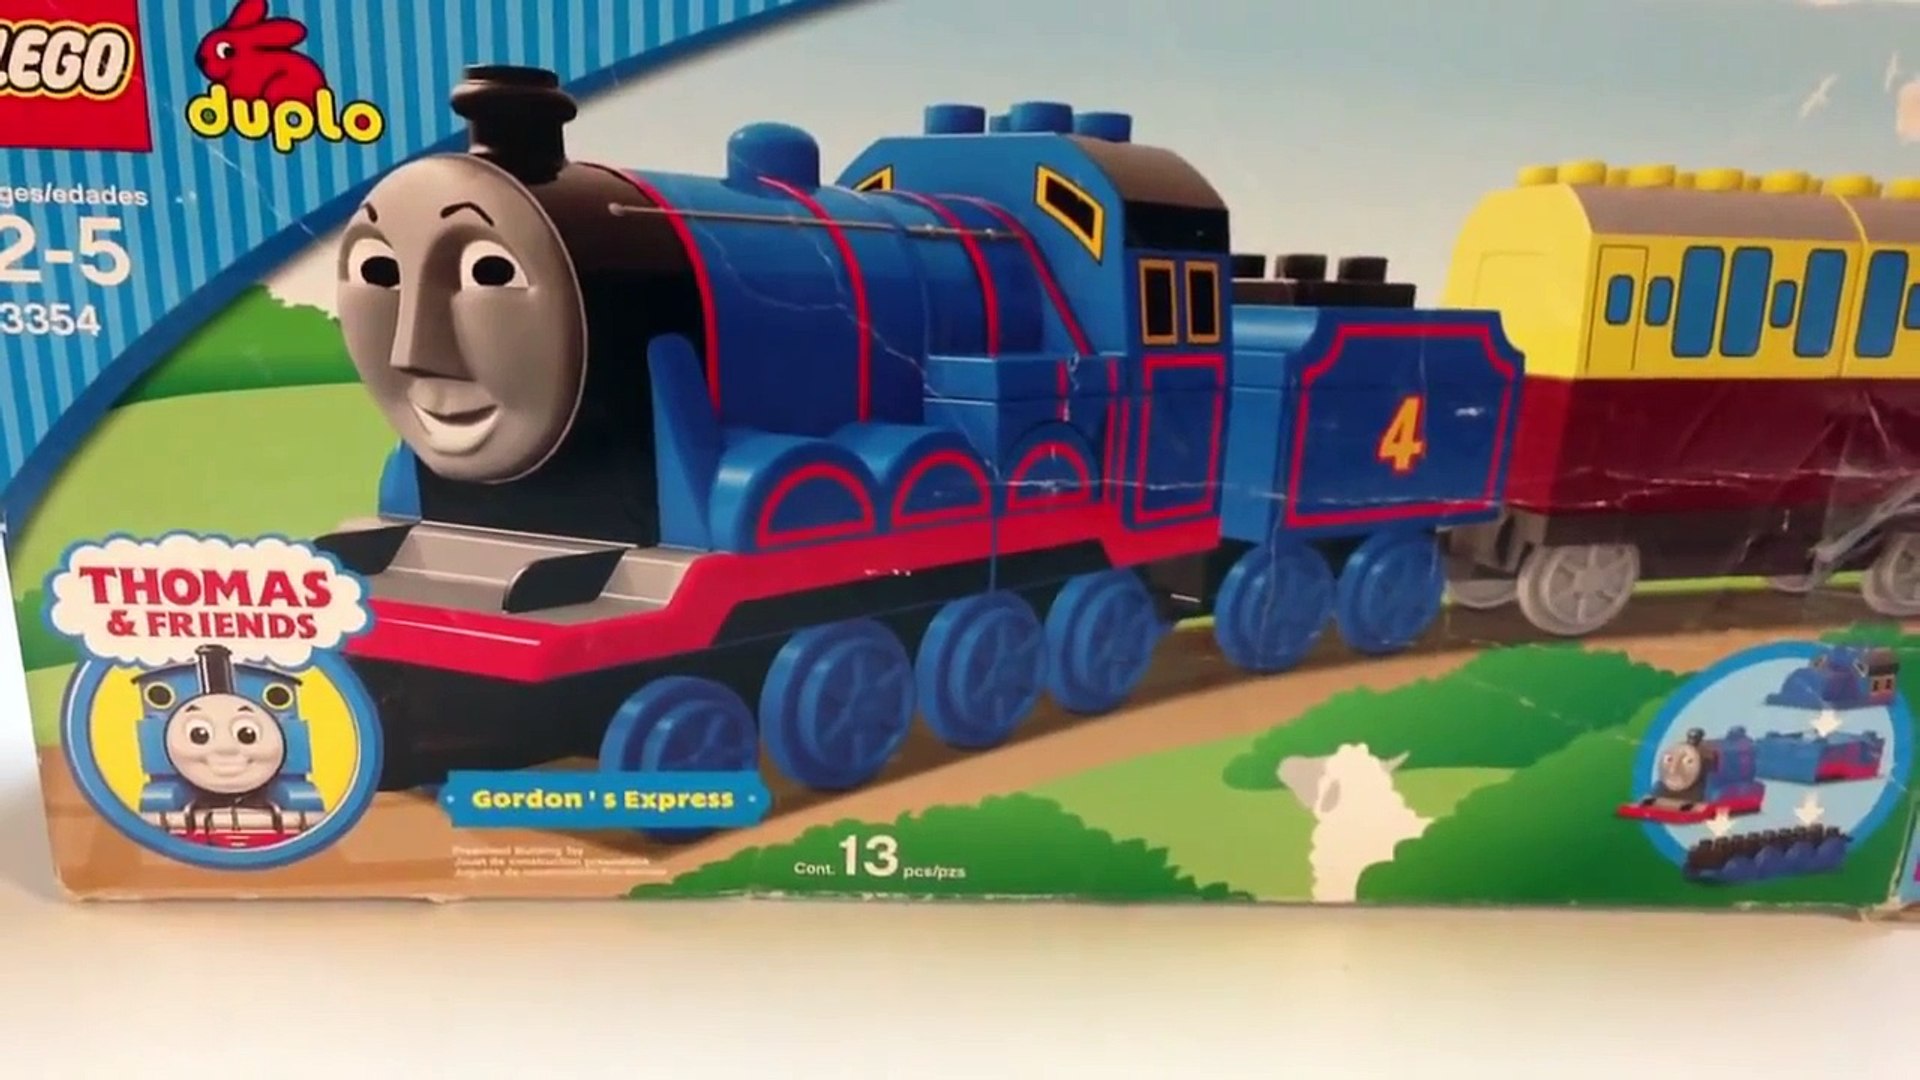 LEGO DUPLO Thomas and Friends 3354 Gordons Express Train review and play -  Vidéo Dailymotion